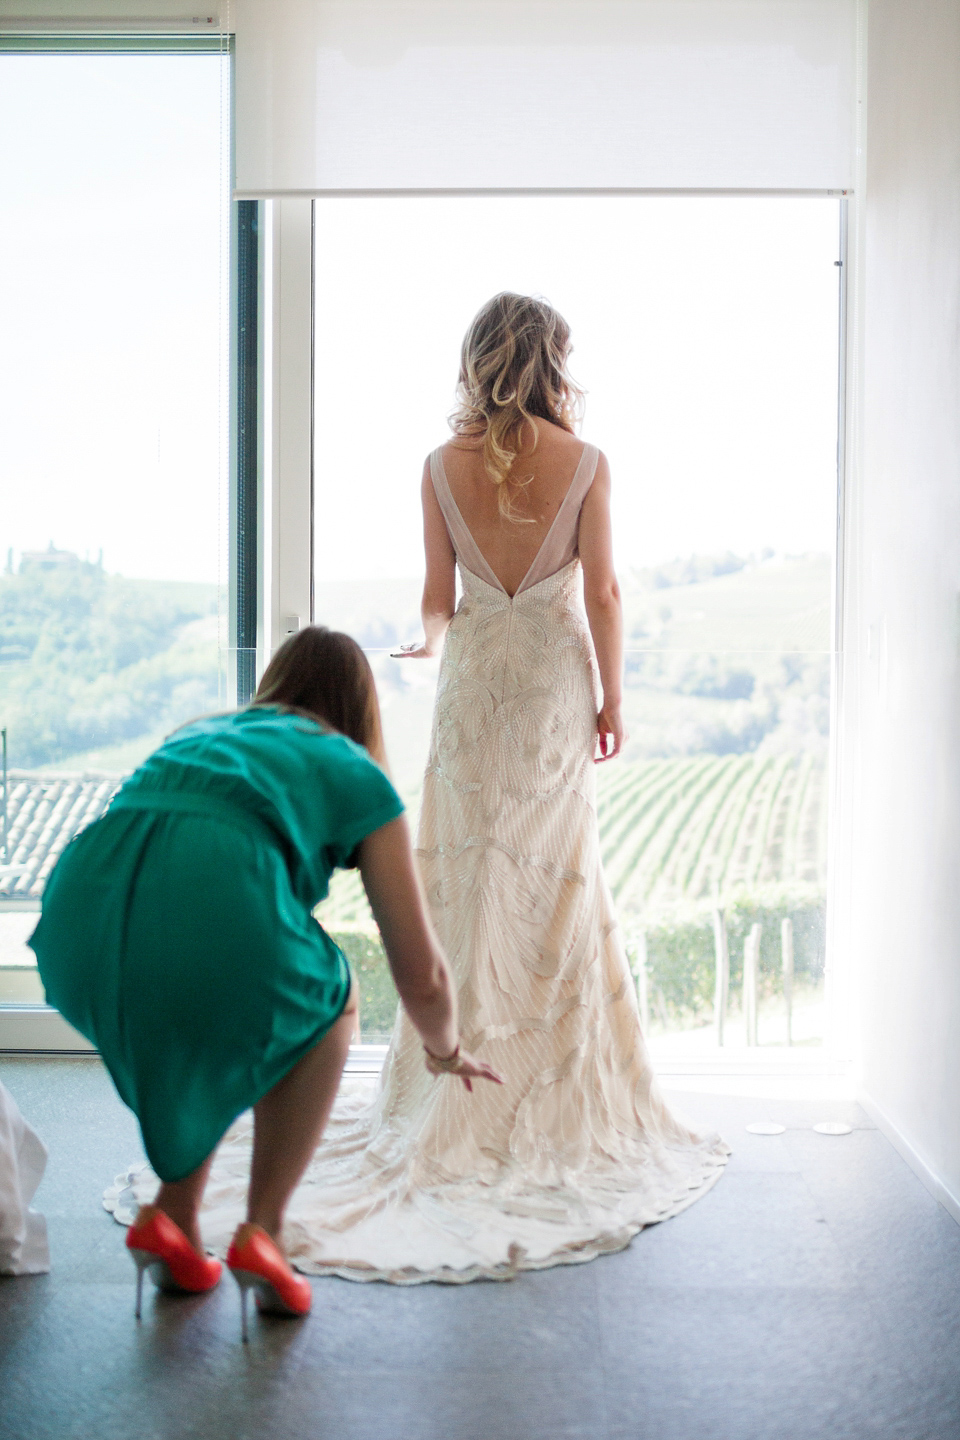 Katherine wore the Gianna Marie gown for her Vanity Fair inspired glamorous destination wedding in the Italian countryside. Photography by James Allan.